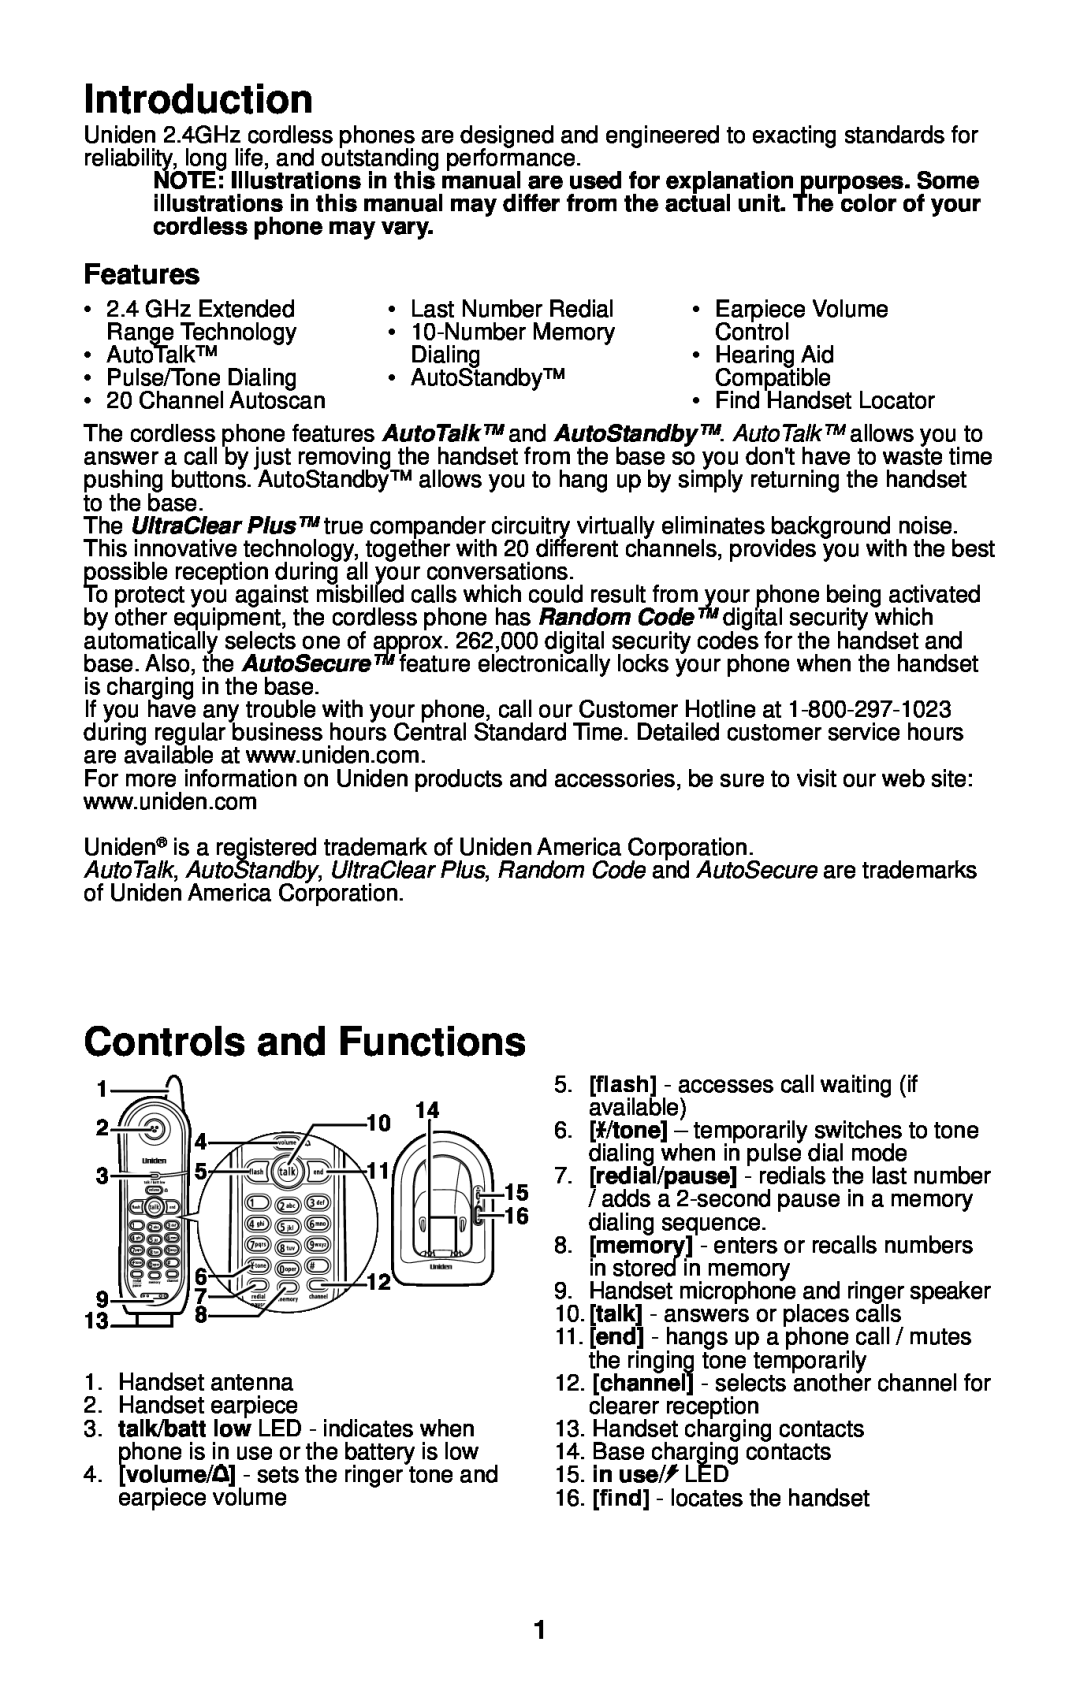 Uniden 4541 manual Introduction, Controls and Functions, Features 